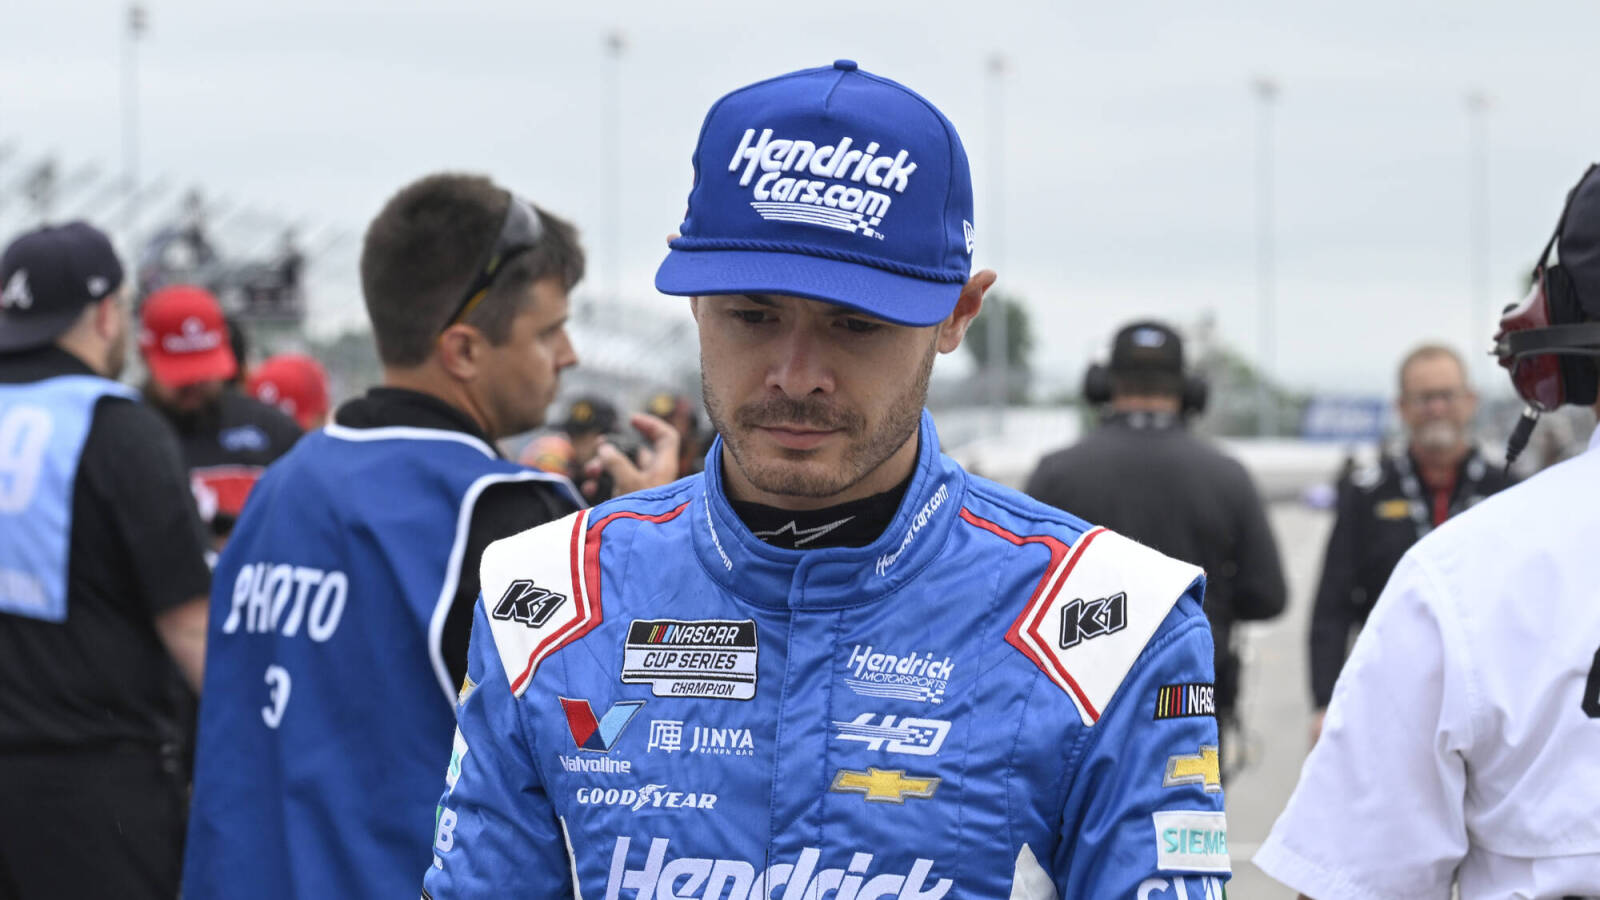 Kyle Larson Championship Hopes in Jeopardy After Missing Coke 600